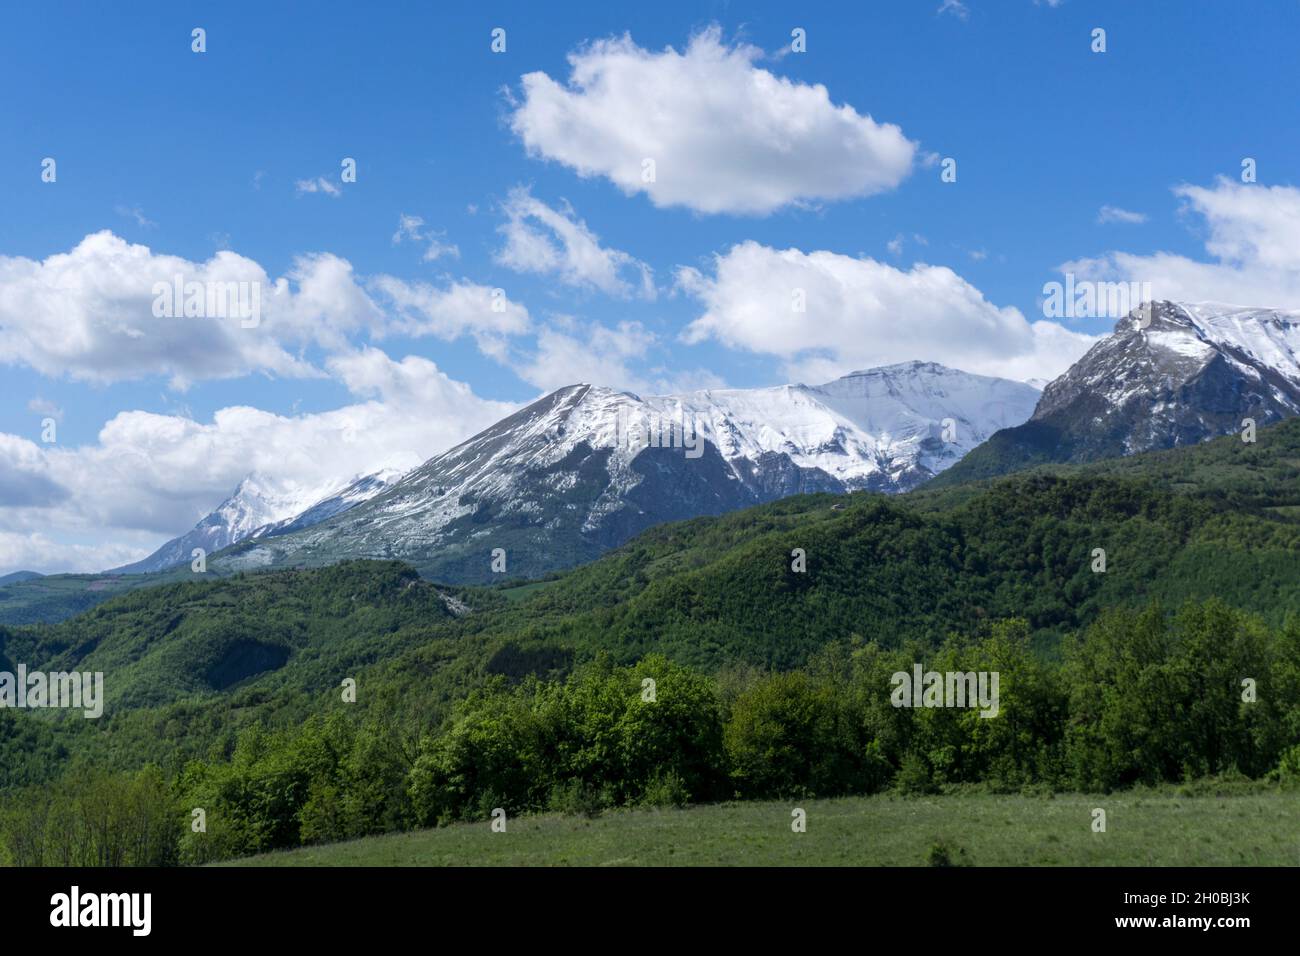 View from Amandola, Landscape, Marche, Italy, Europe Stock Photo